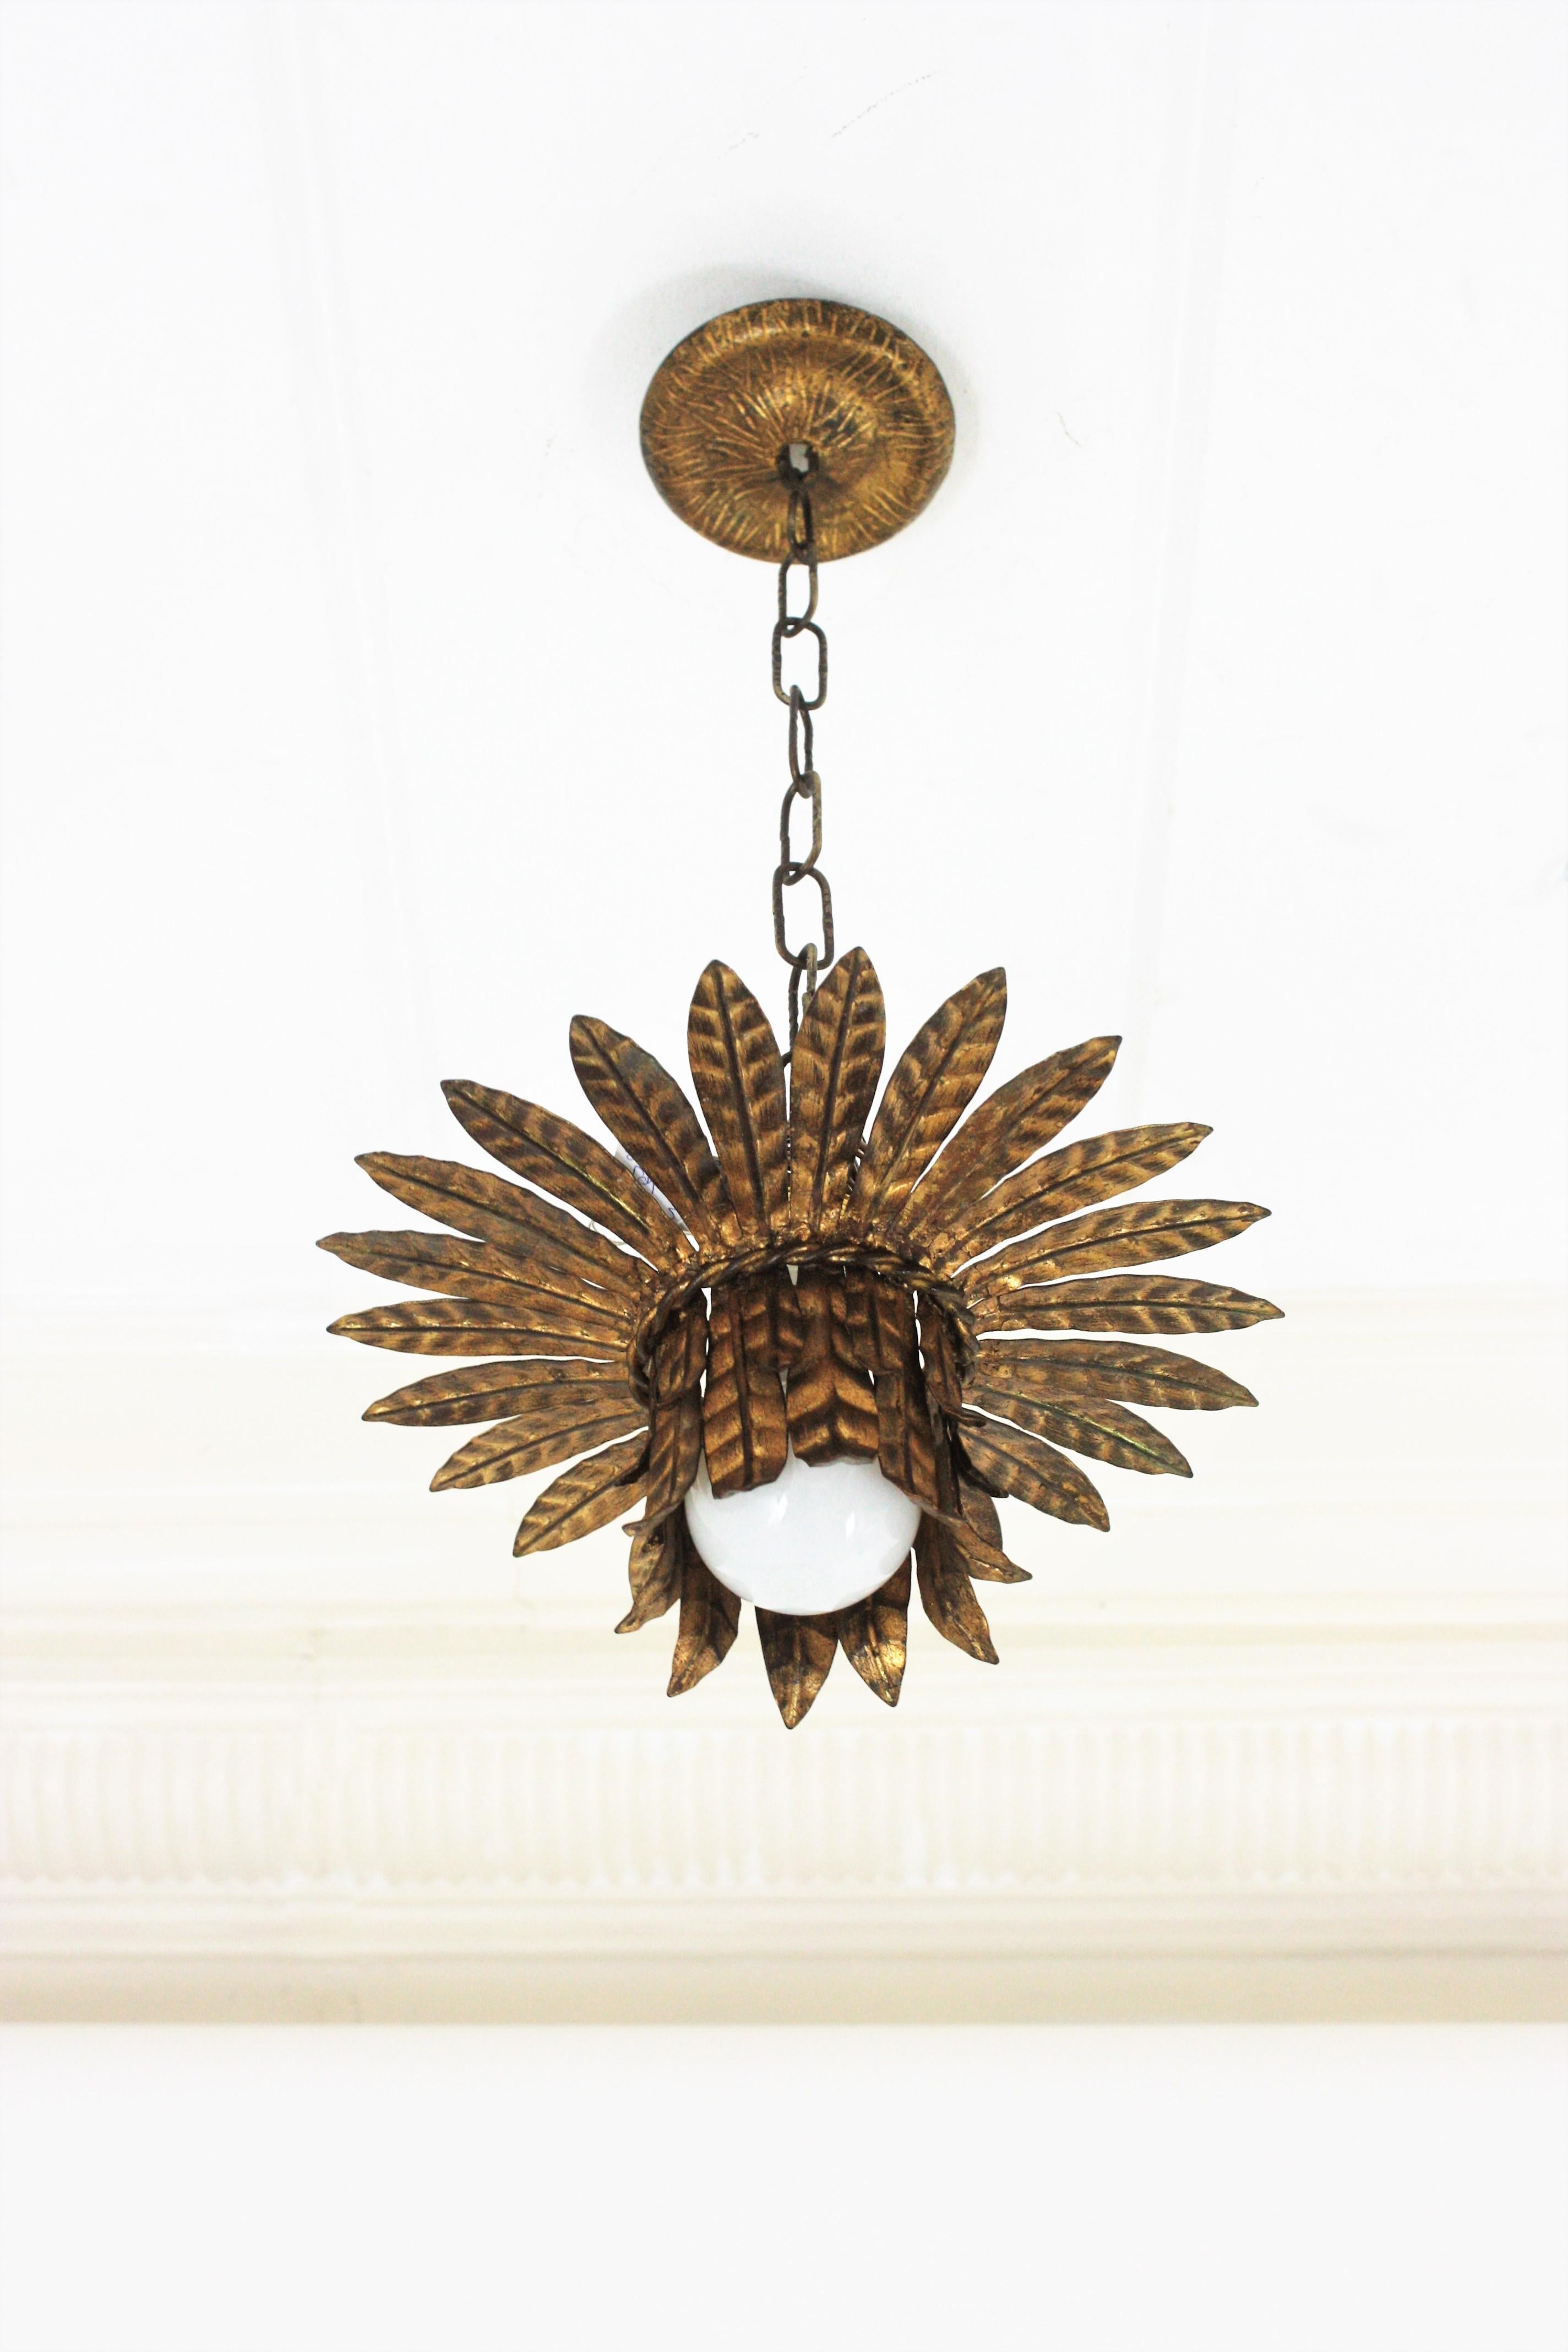 Hollywood Regency gilt iron leaves bouquet crown flush mount / pendant. France, 1940s.
This flush mount features a bouquet of iron leaves distributed as a crown sunburst and adorned with a twisted iron rope. It has one central light. The leaves show